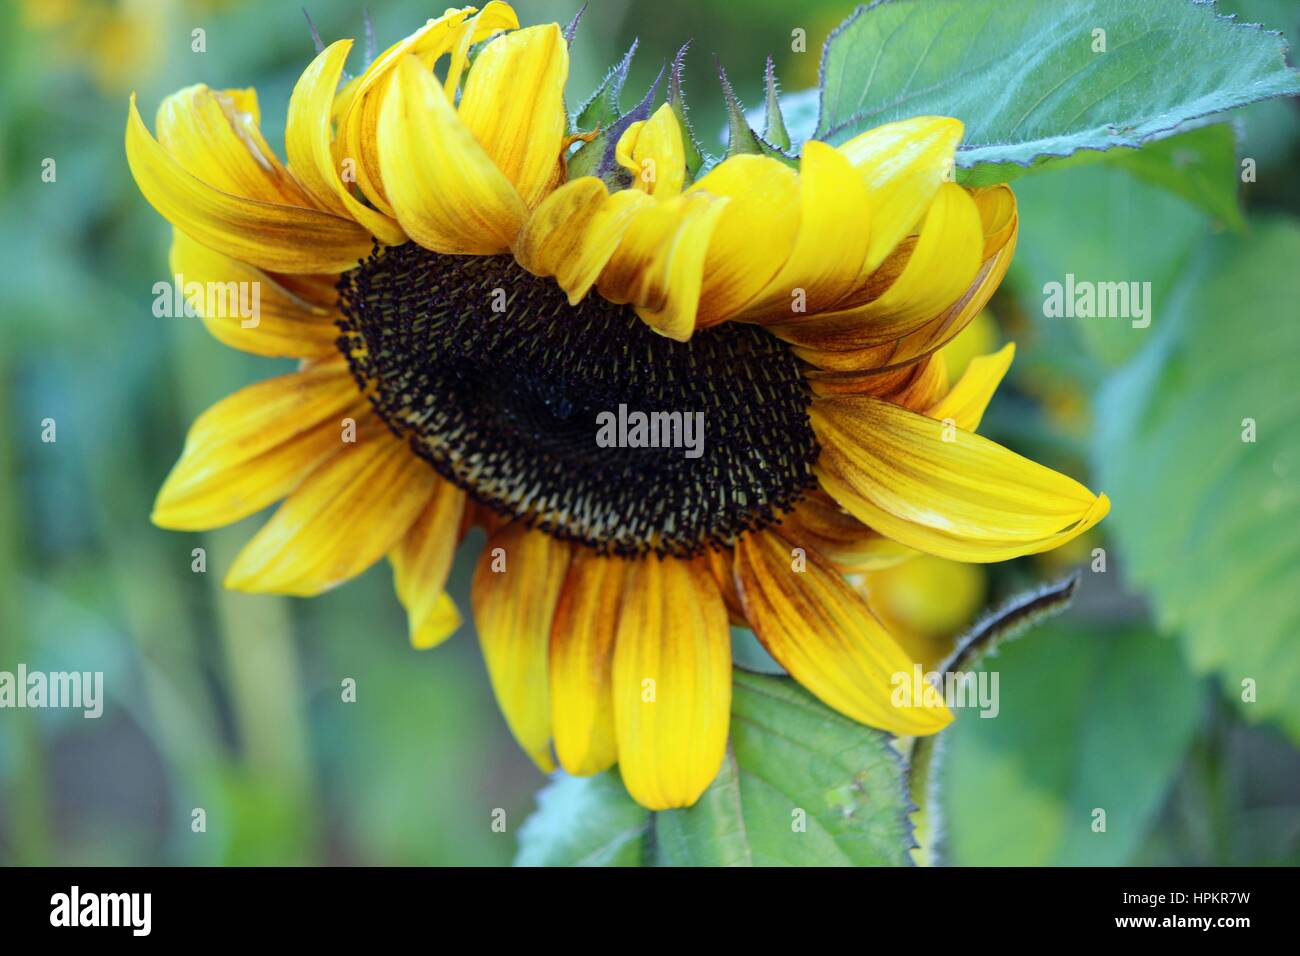 A sunflower Helianthus annuus blooming in Fall Stock Photo